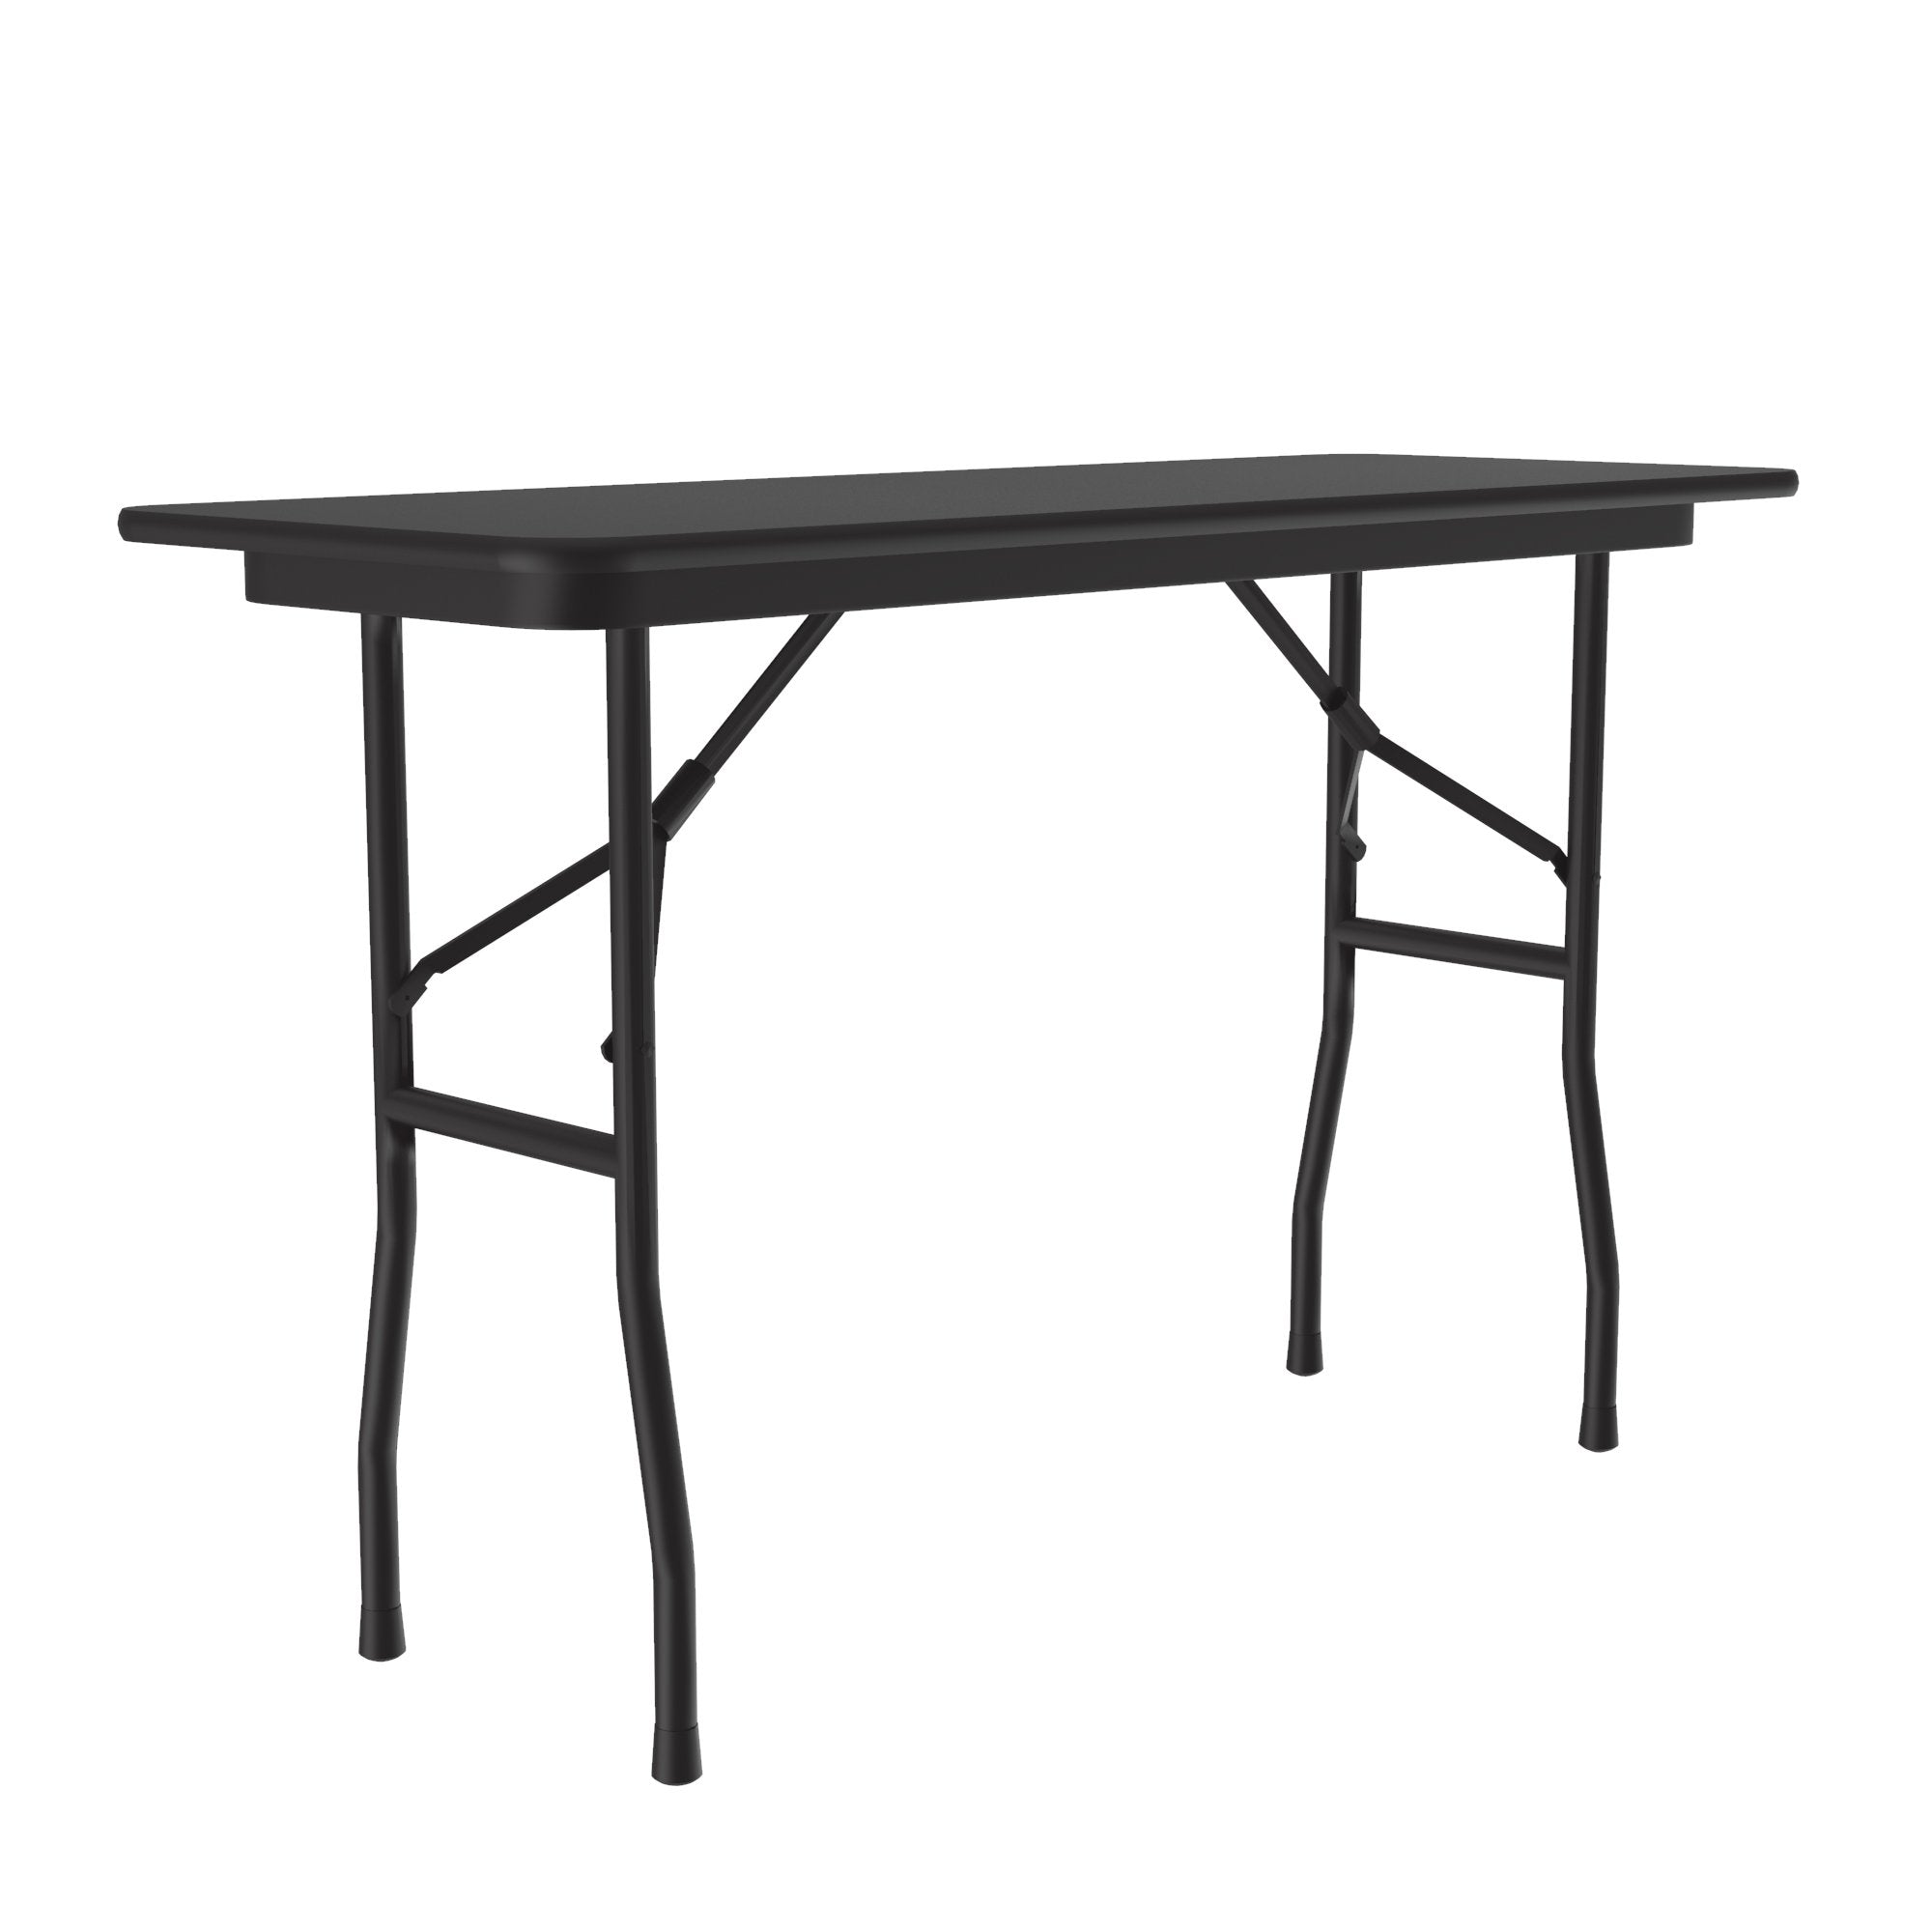 Thermal Fused Laminate Folding Tables, Standard Height